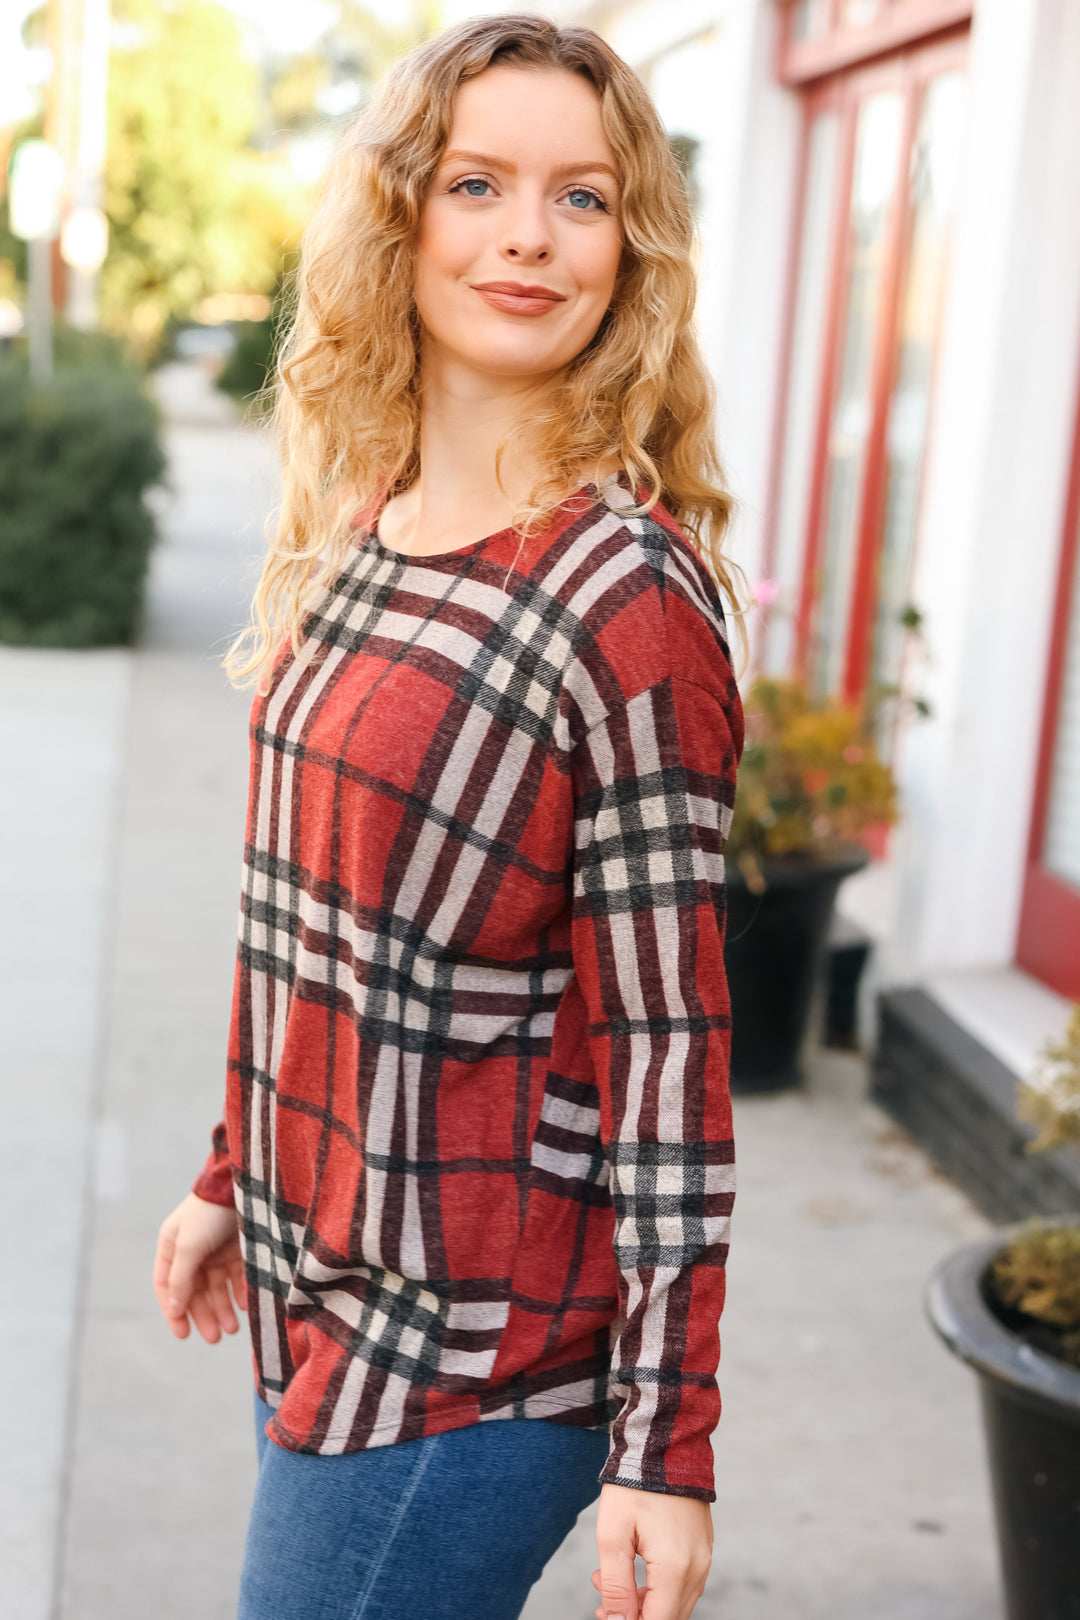 Good Times - Red Plaid Top